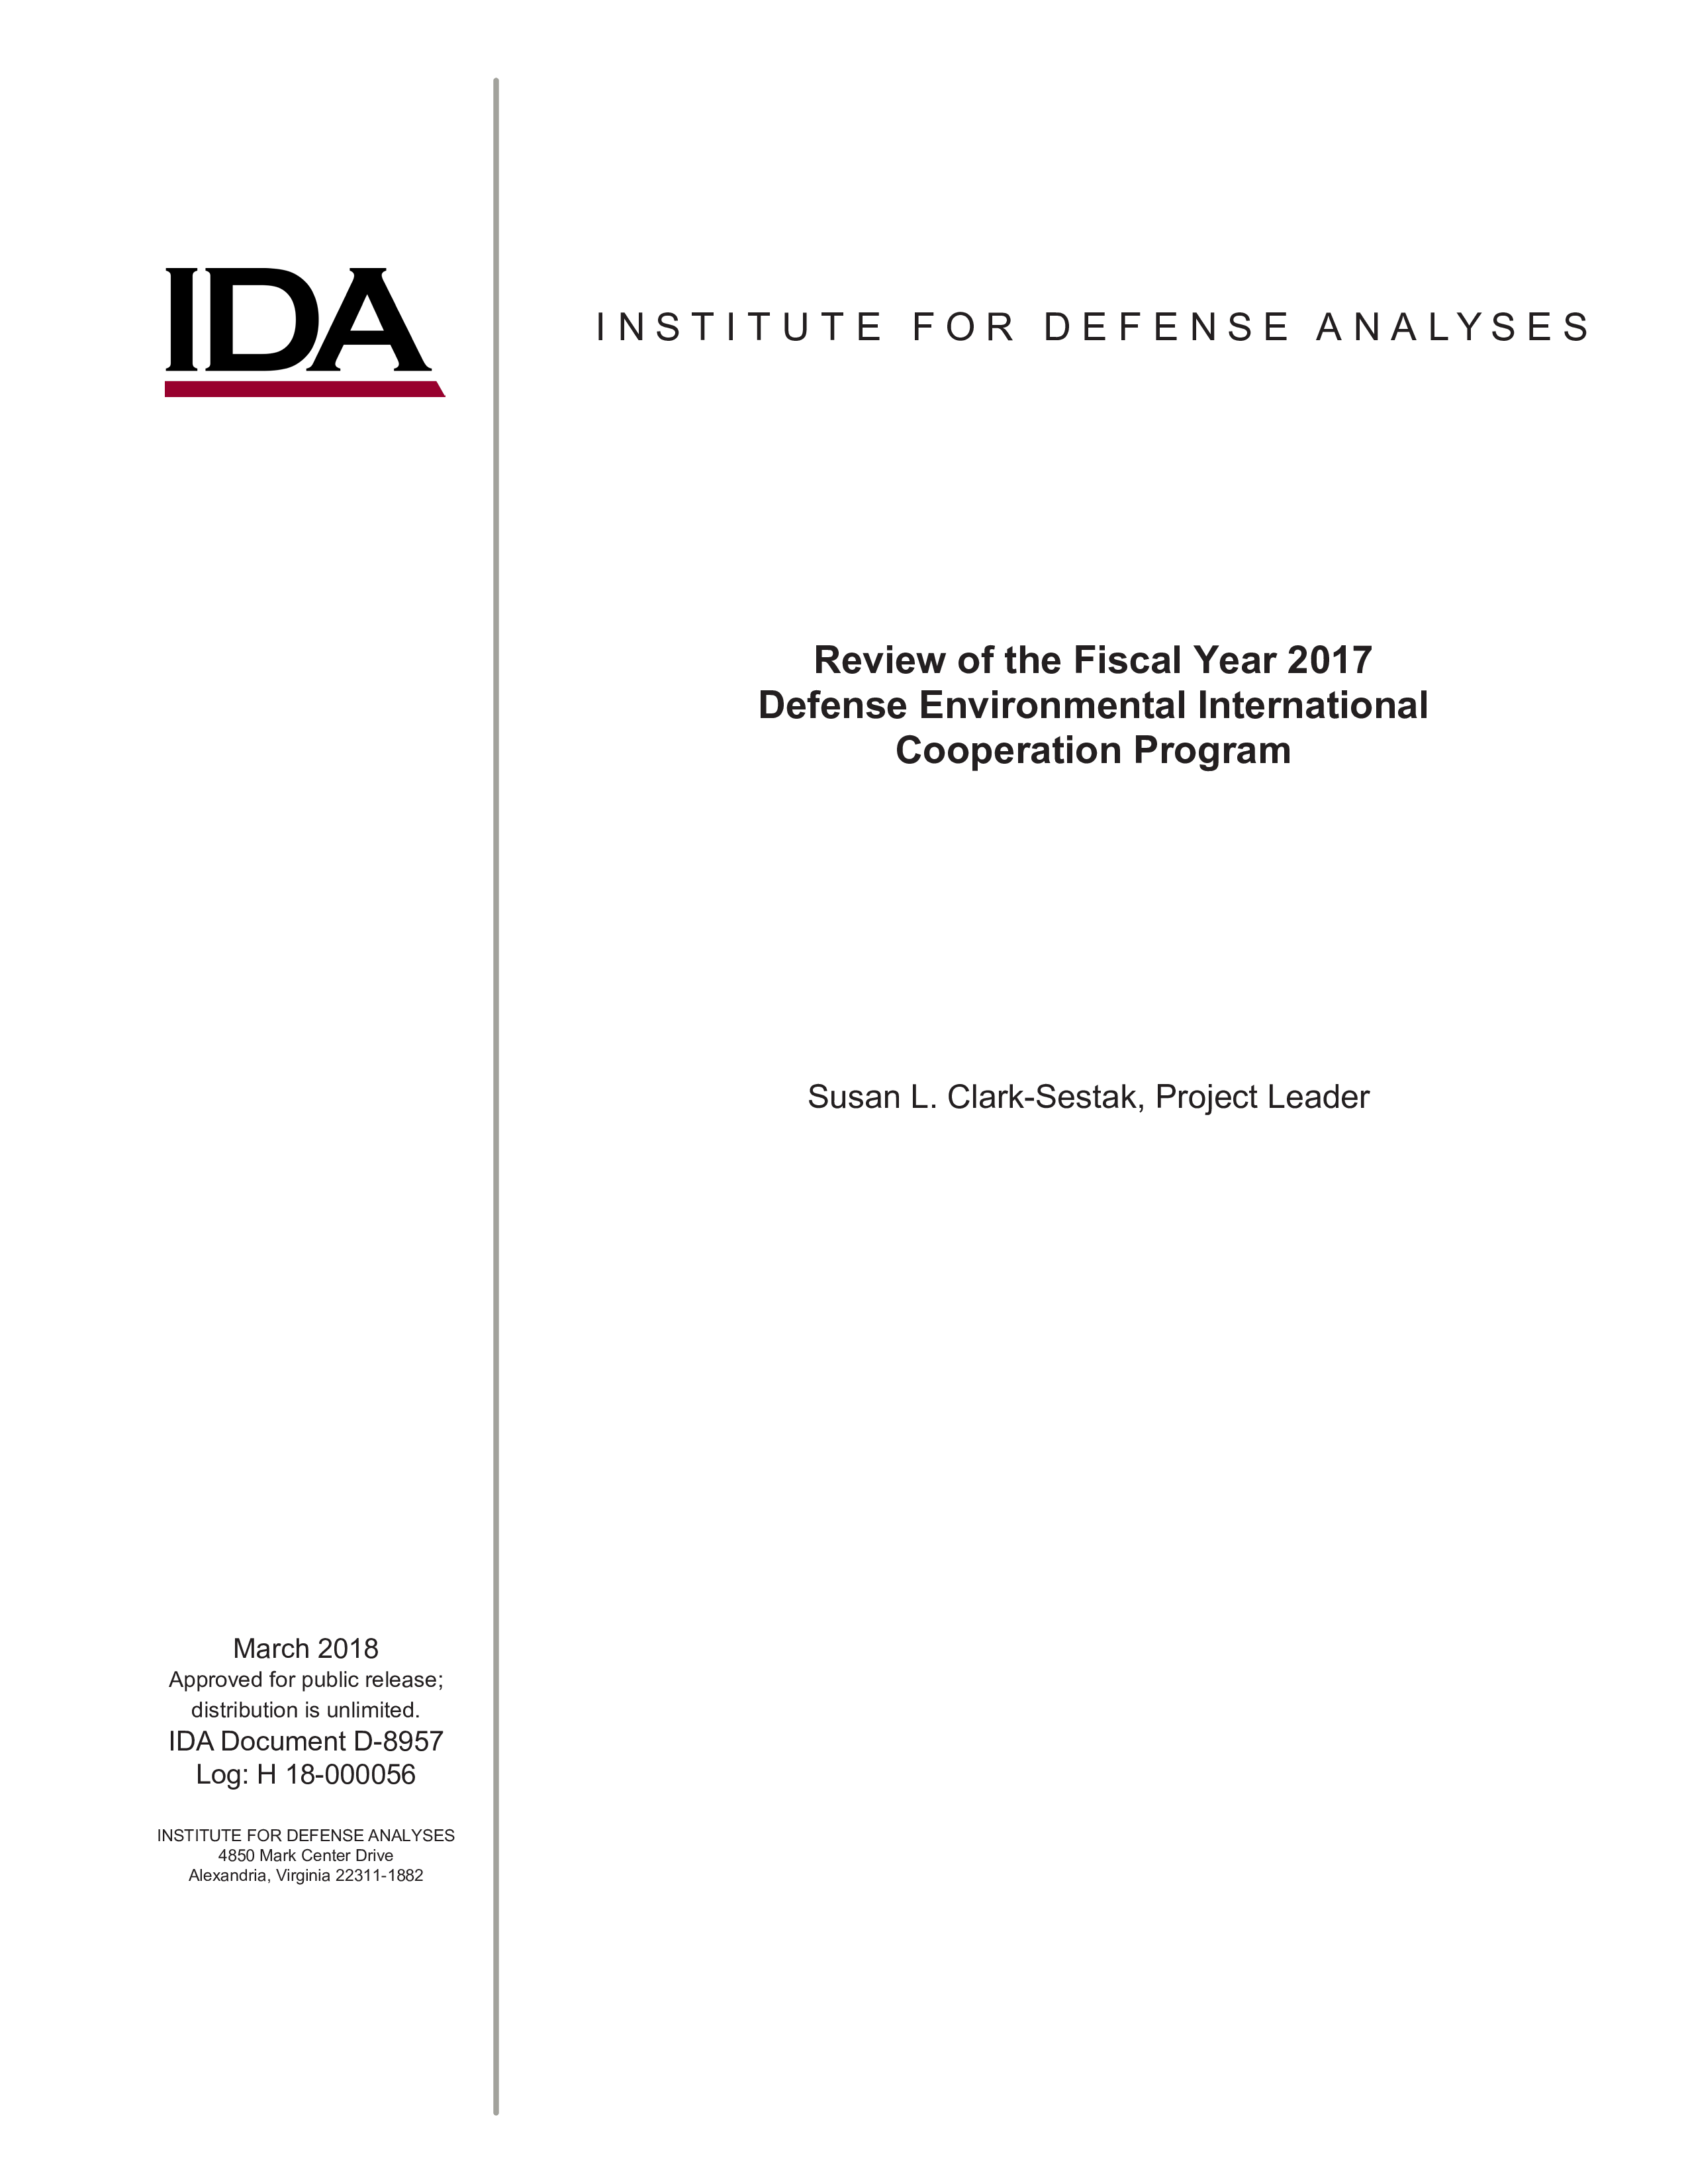 Review of the Fiscal Year 2017 Defense Environmental International Cooperation Program